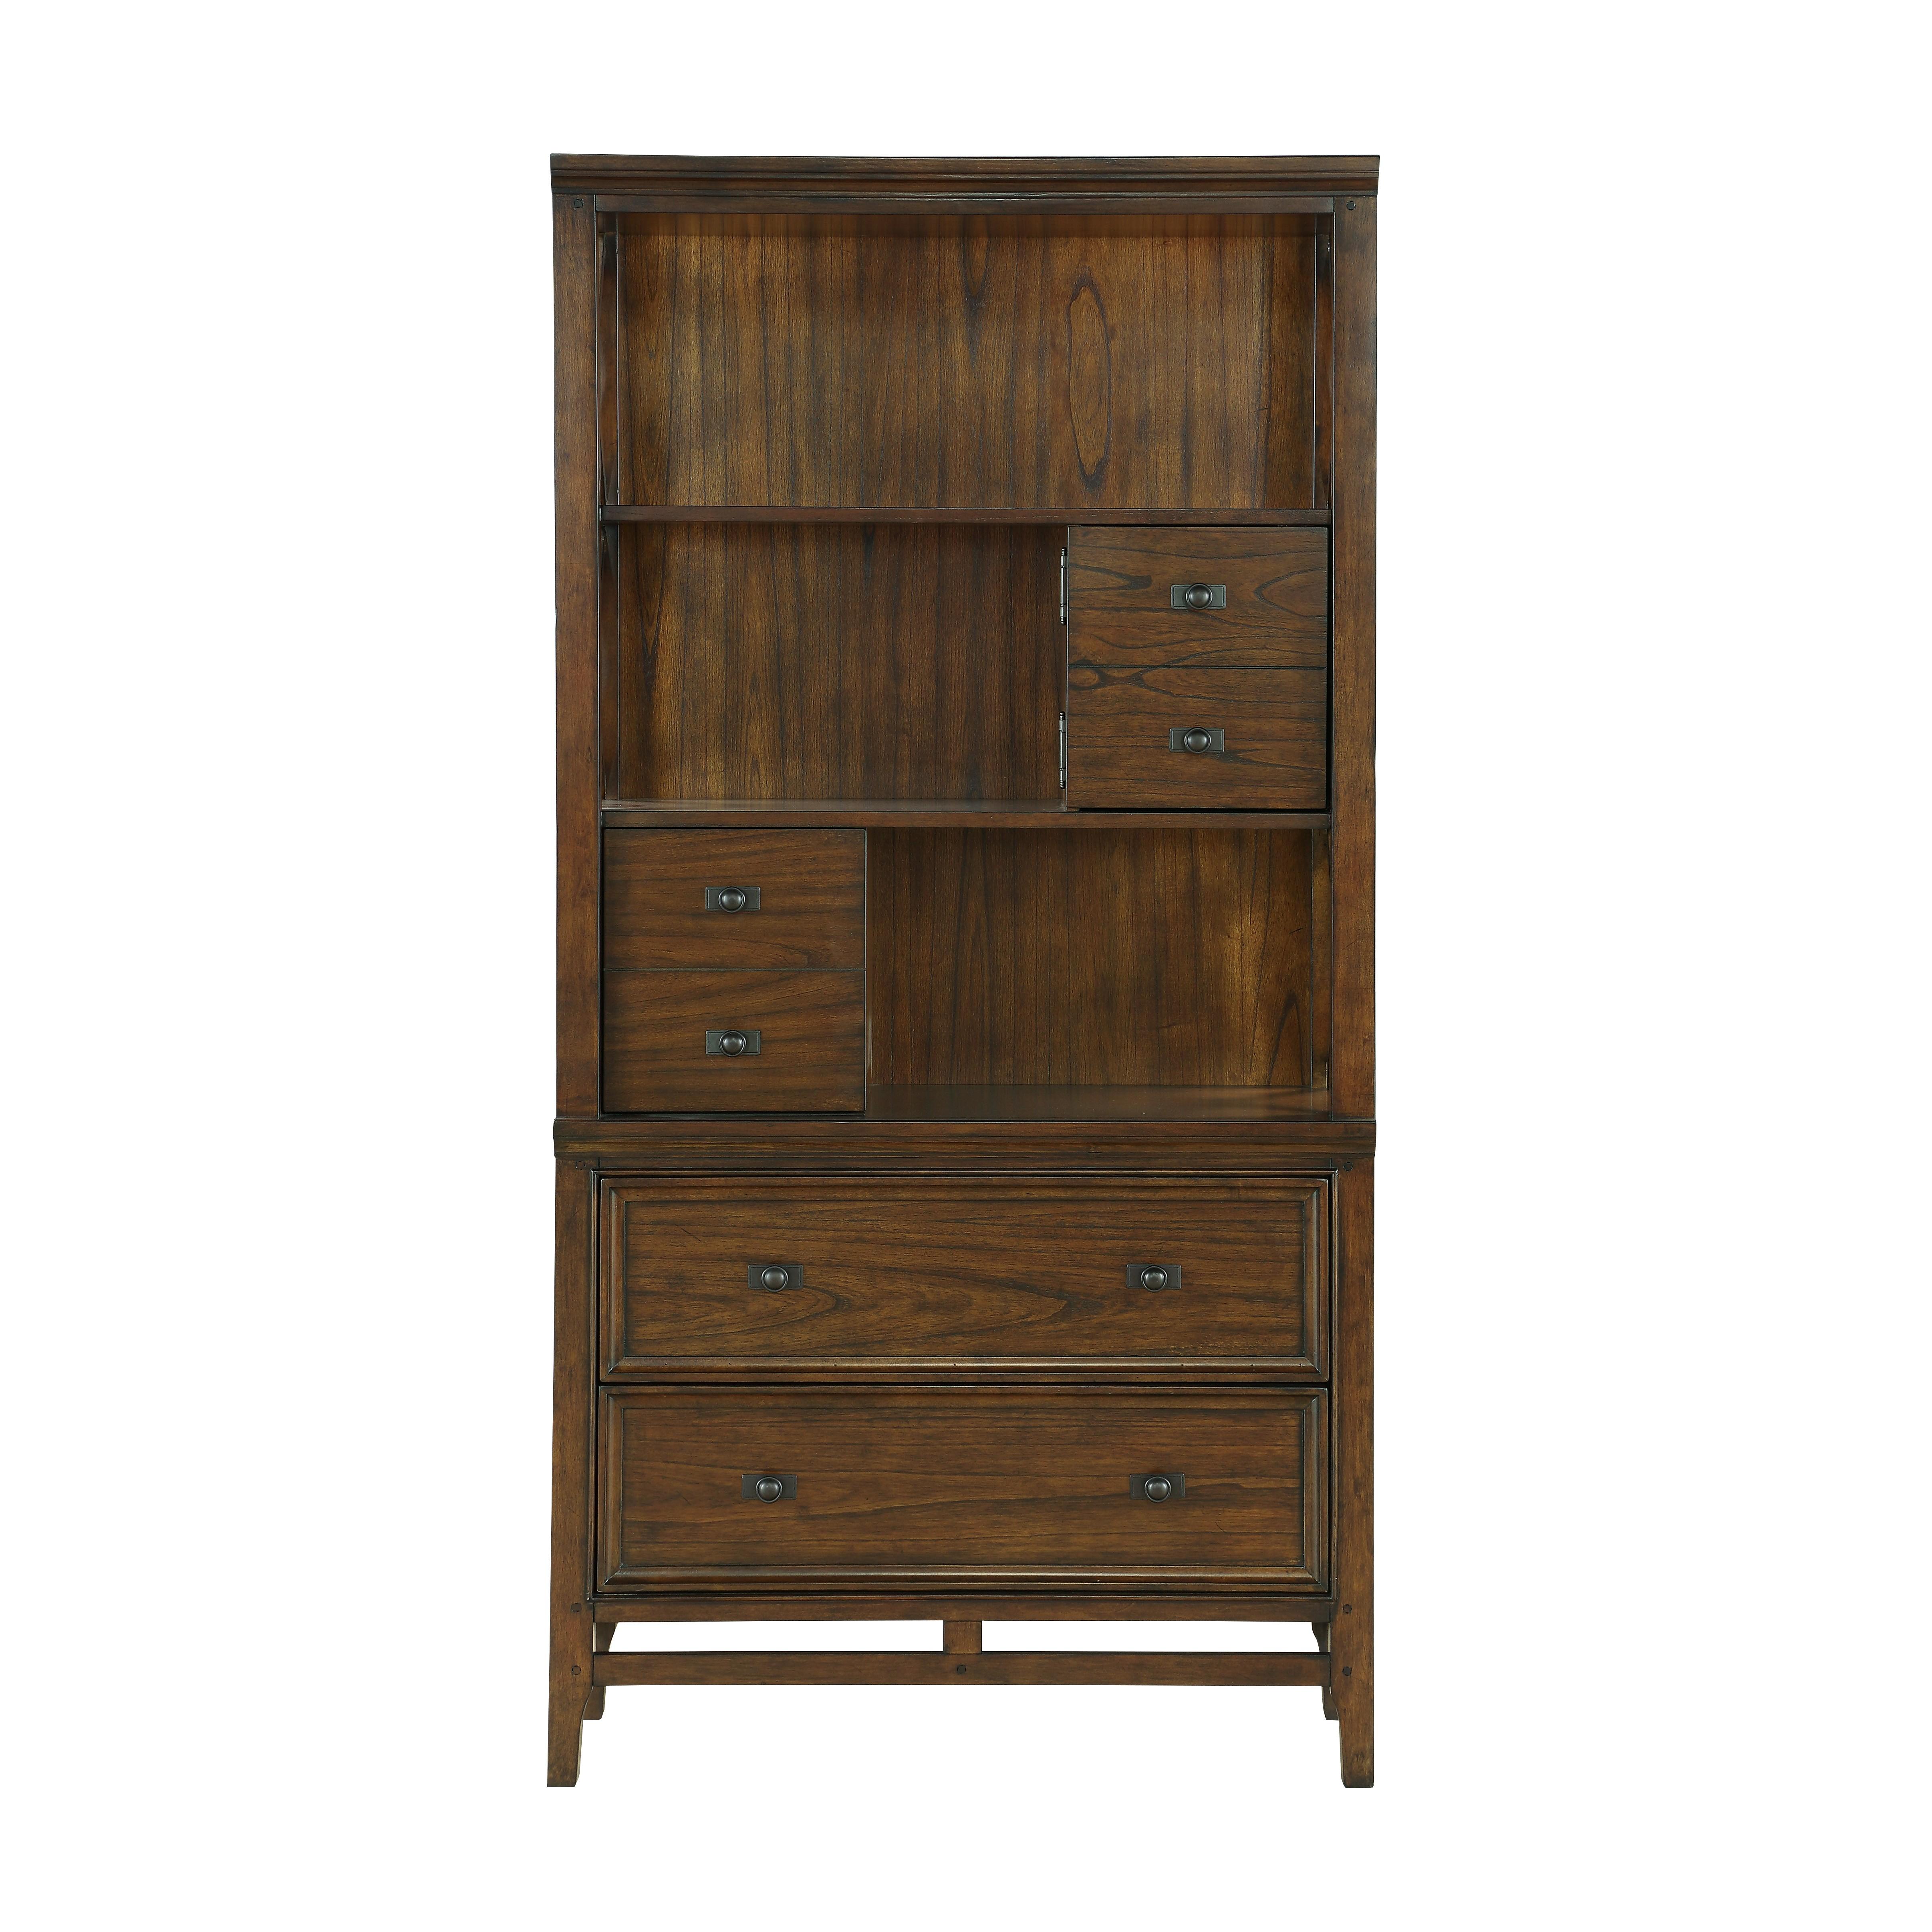 Traditional Bookcase 1649-18 Frazier Park 1649-18 in Cherry 